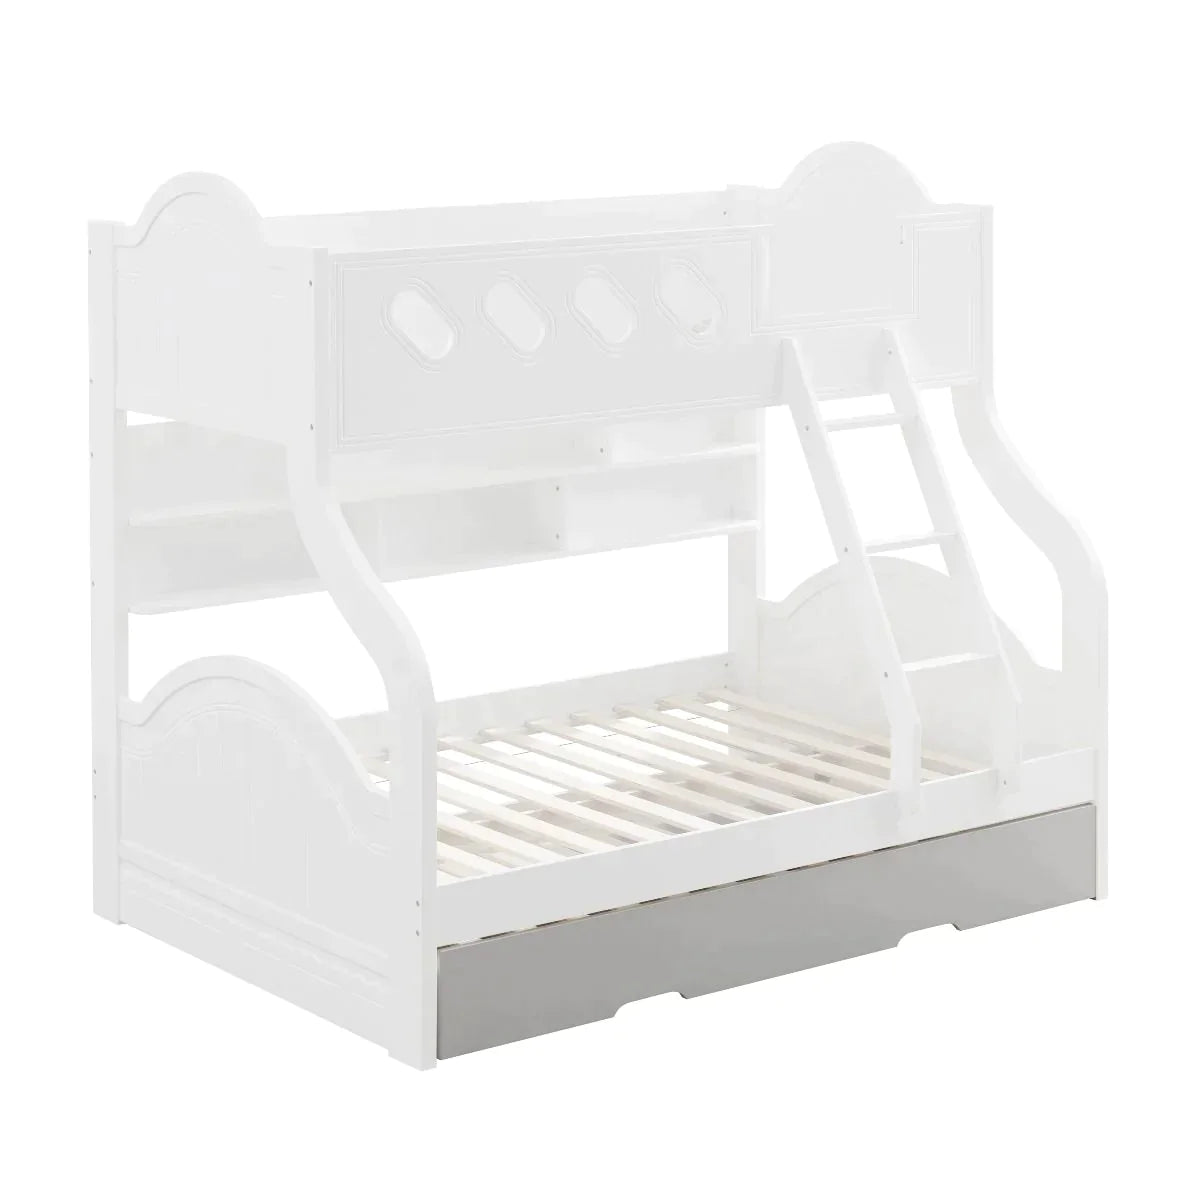 Grover White Trundle Model 38165 By ACME Furniture